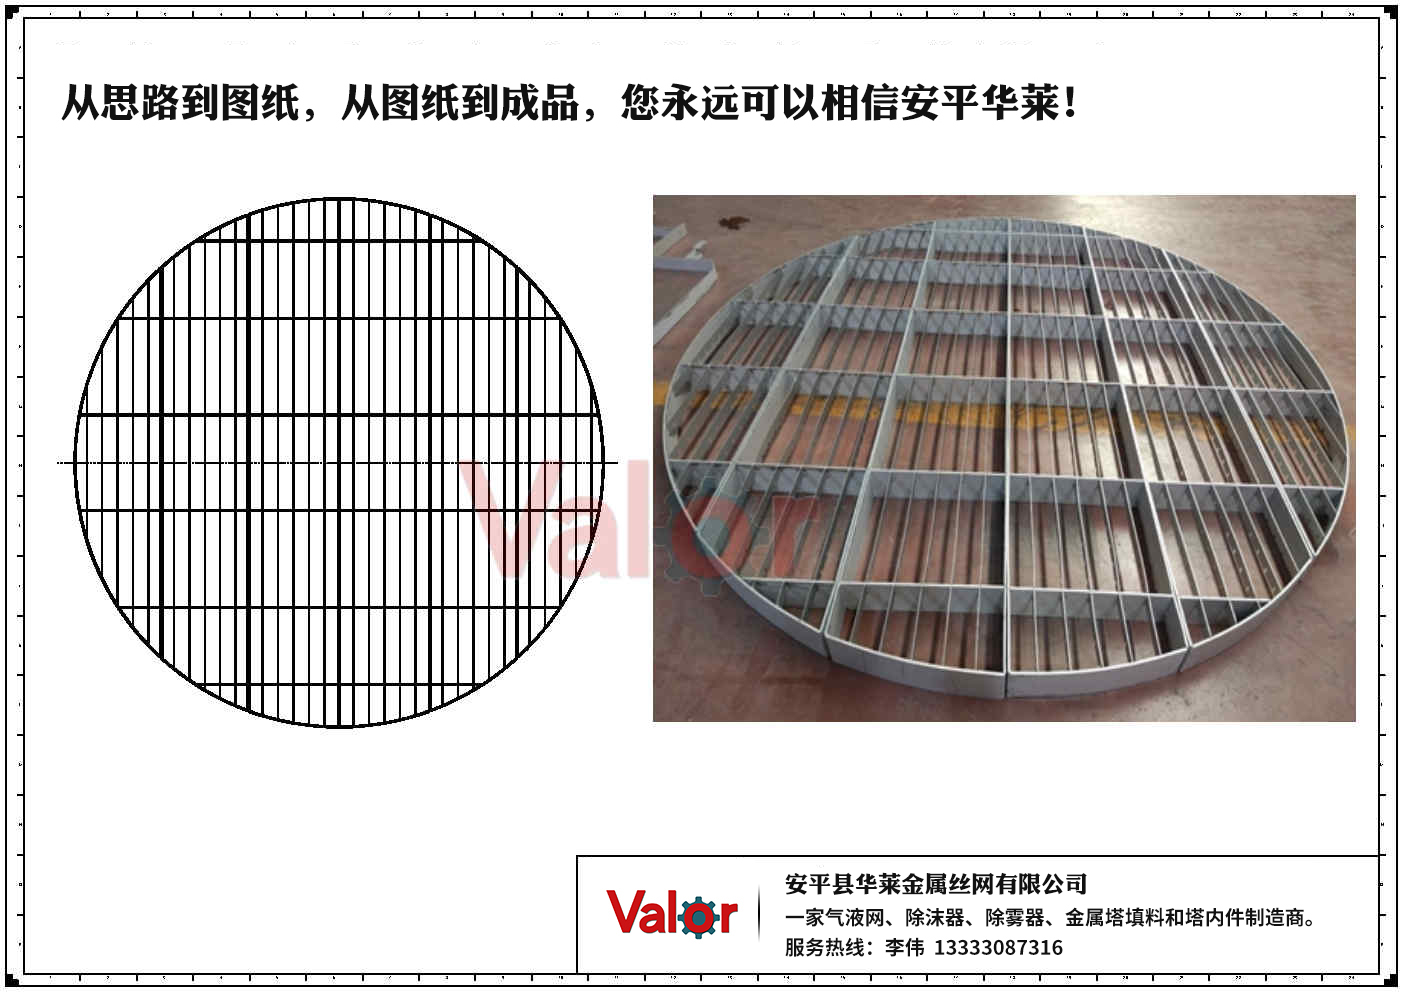 structured packing support stainless steel grids